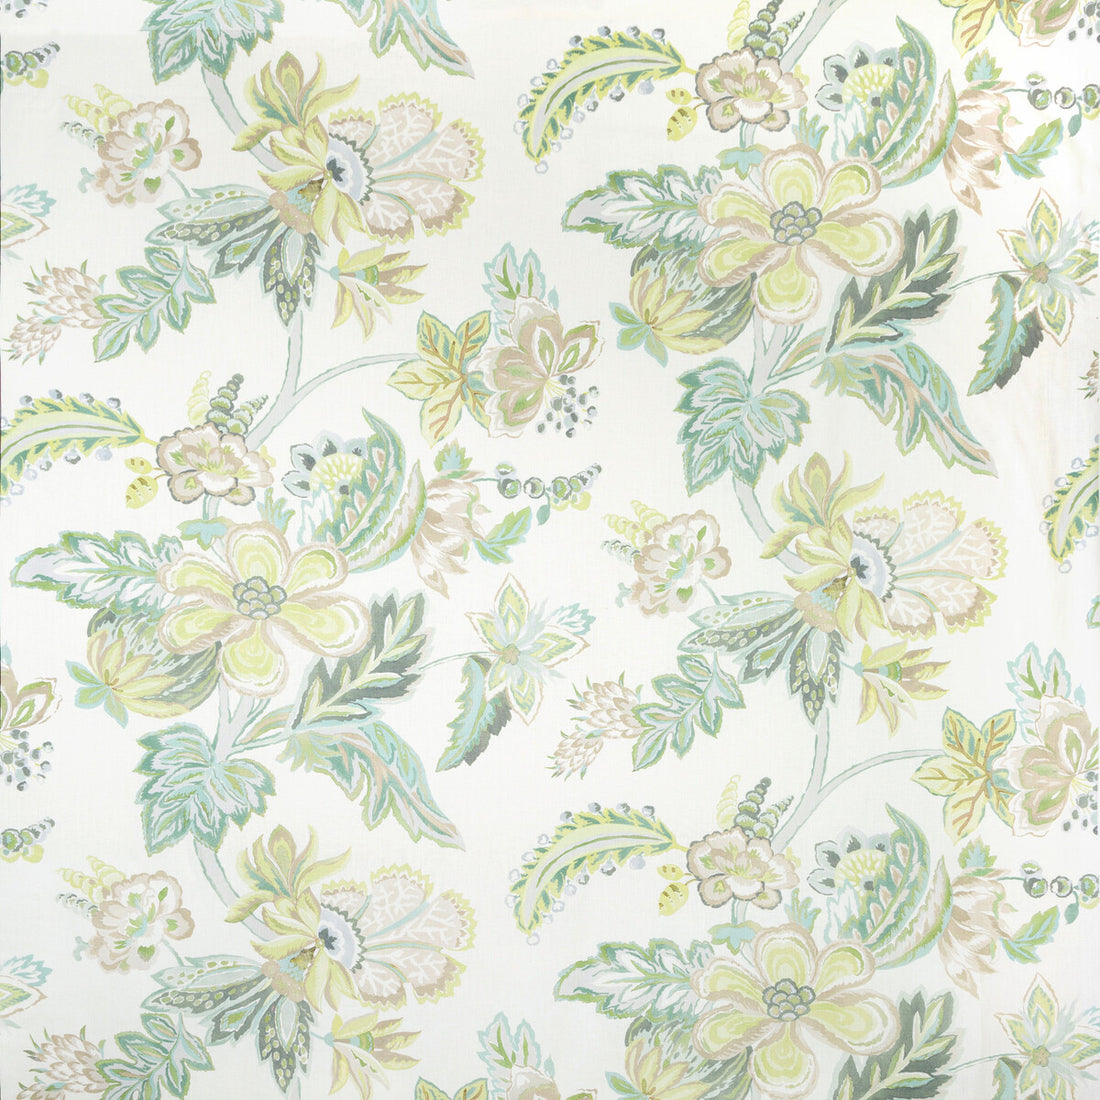 Augustine Print fabric in celadon color - pattern 2020191.123.0 - by Lee Jofa in the Avondale collection